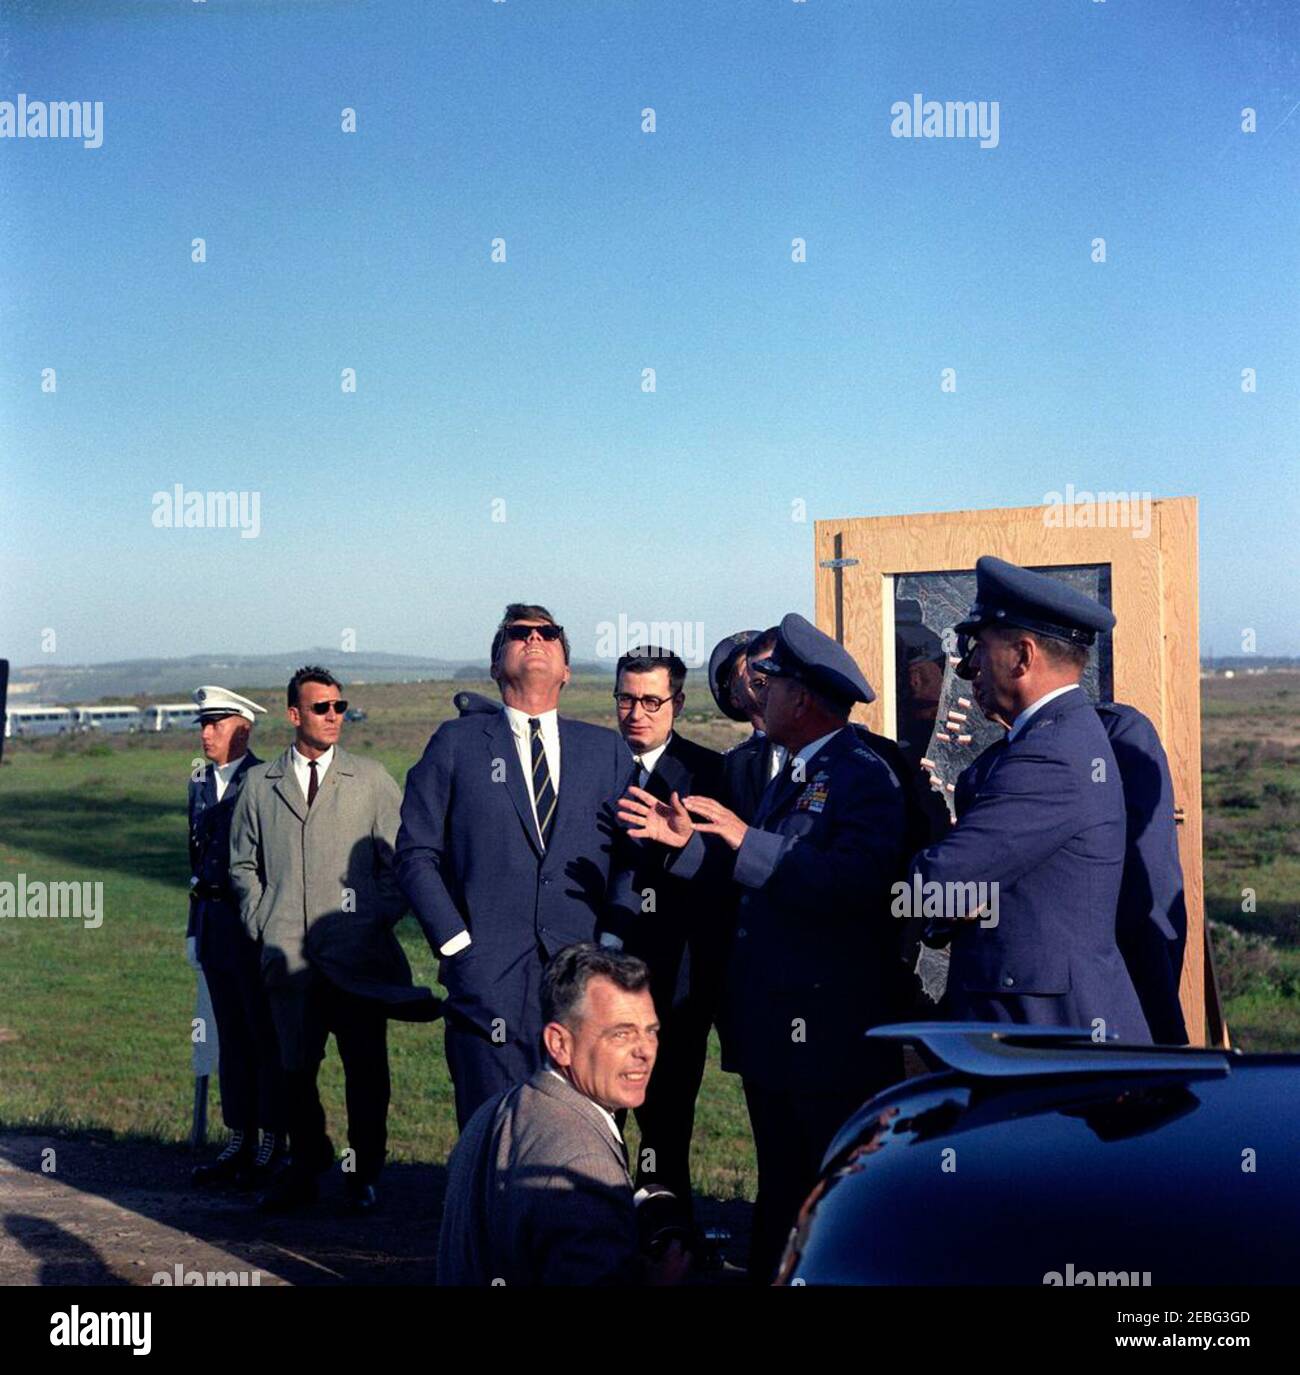 Trip to California: Vandenberg Air Force Base, 4:08PM. President John F. Kennedy (wearing sunglasses) watches Atlas 134D missile launch at Vandenberg Air Force Base, California. Left to right: Unidentified man; White House Secret Service agent, Bob Lilley; President Kennedy; Director of Research and Development for the Department of Defense, Dr. Harold Brown; Commander of Strategic Air Command, General Thomas S. Power; Air Force Aide to the President, Brigadier General Godfrey T. McHugh. An unidentified photographer stands in foreground. Stock Photo